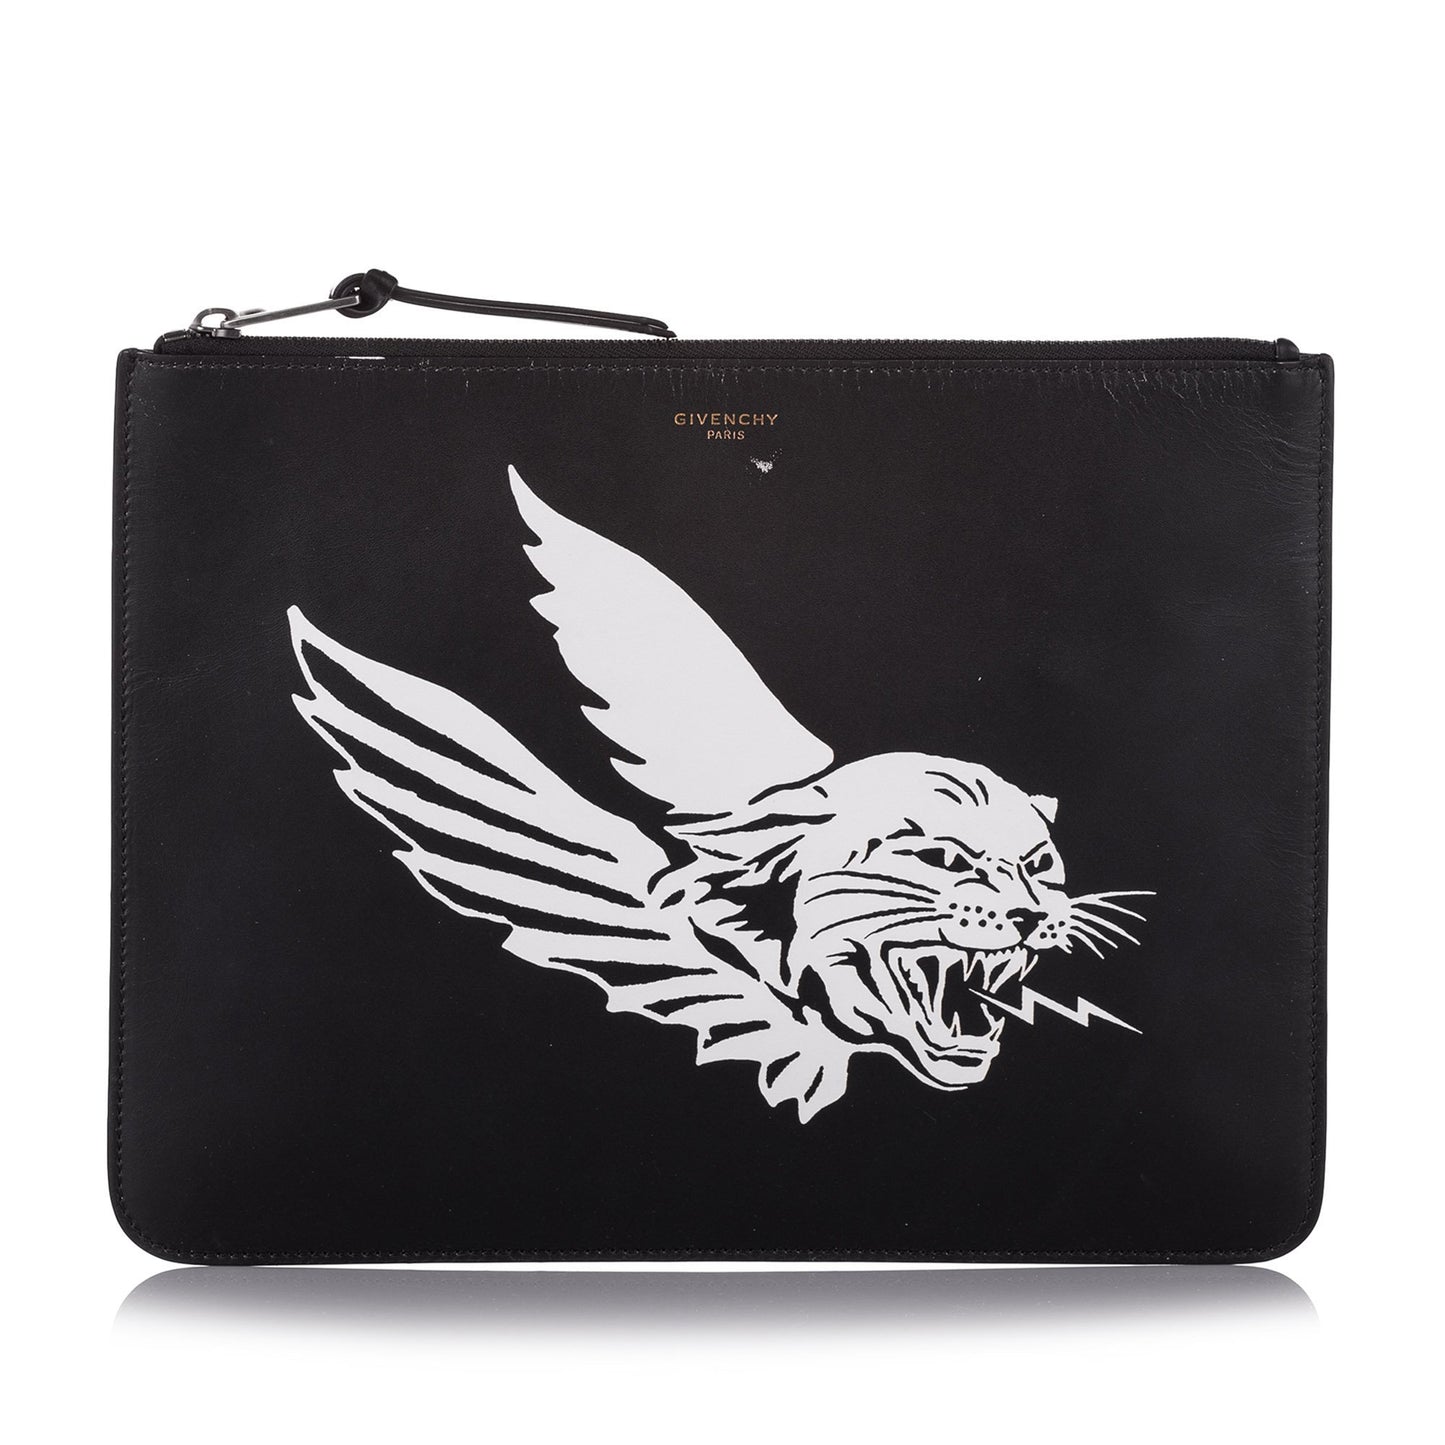 Givenchy Winged Tiger Print Black Leather Clutch Bags Givenchy 